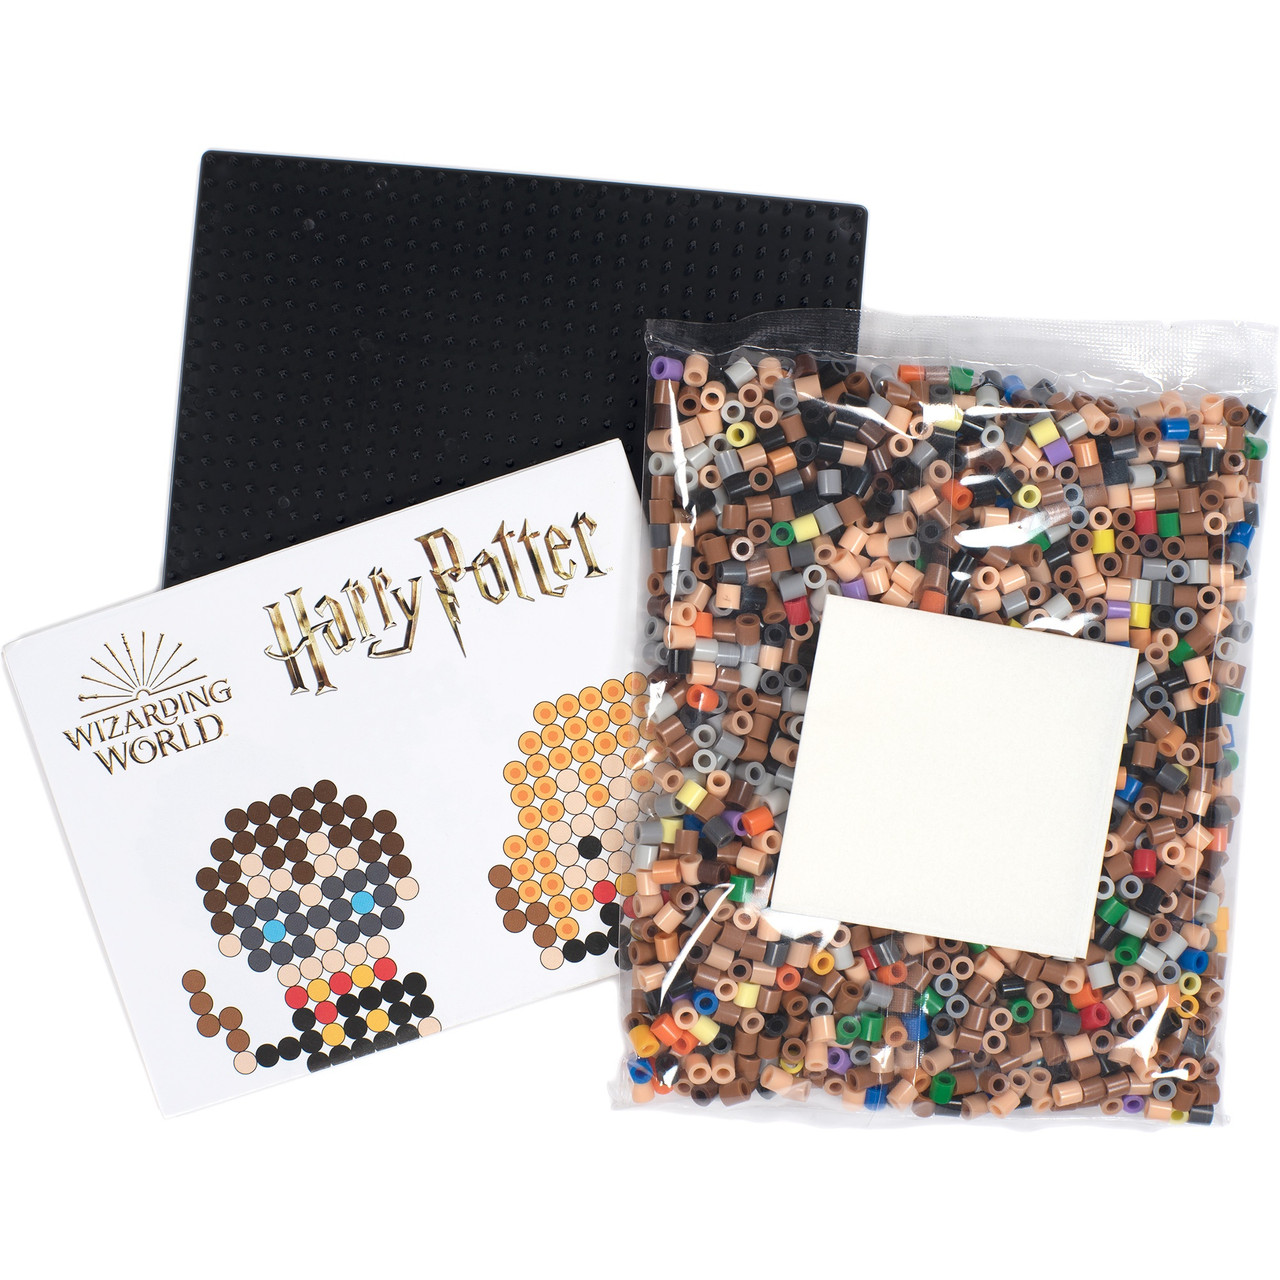 80-22852 PERLER FUSED BEAD PATTERN PAD WB HPOTTER